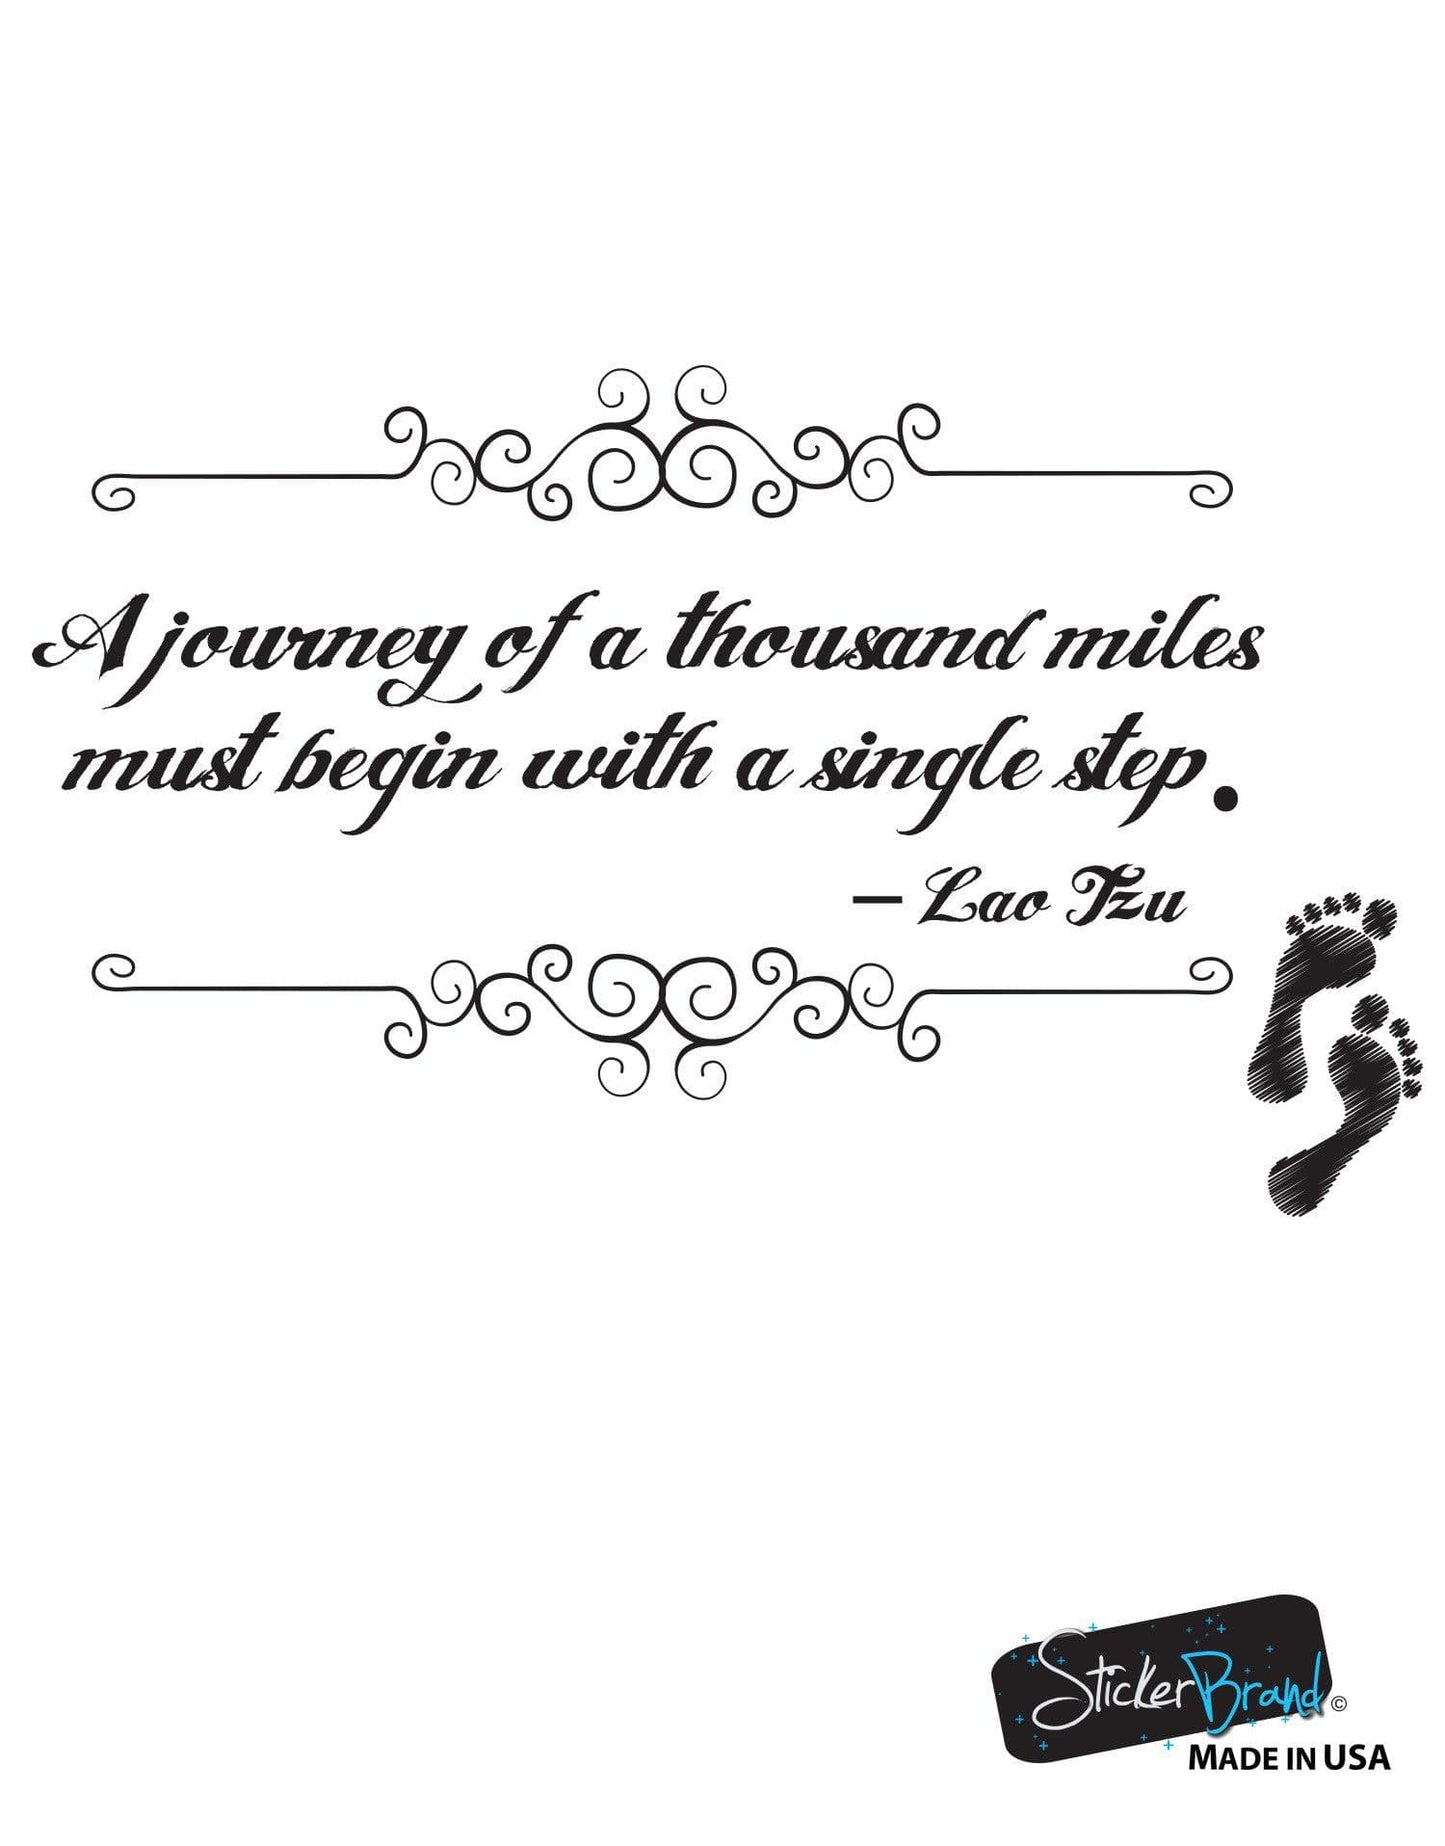 A journey of a thousand miles must begin with a single step. Lao Tzu Quote #OS_DC529